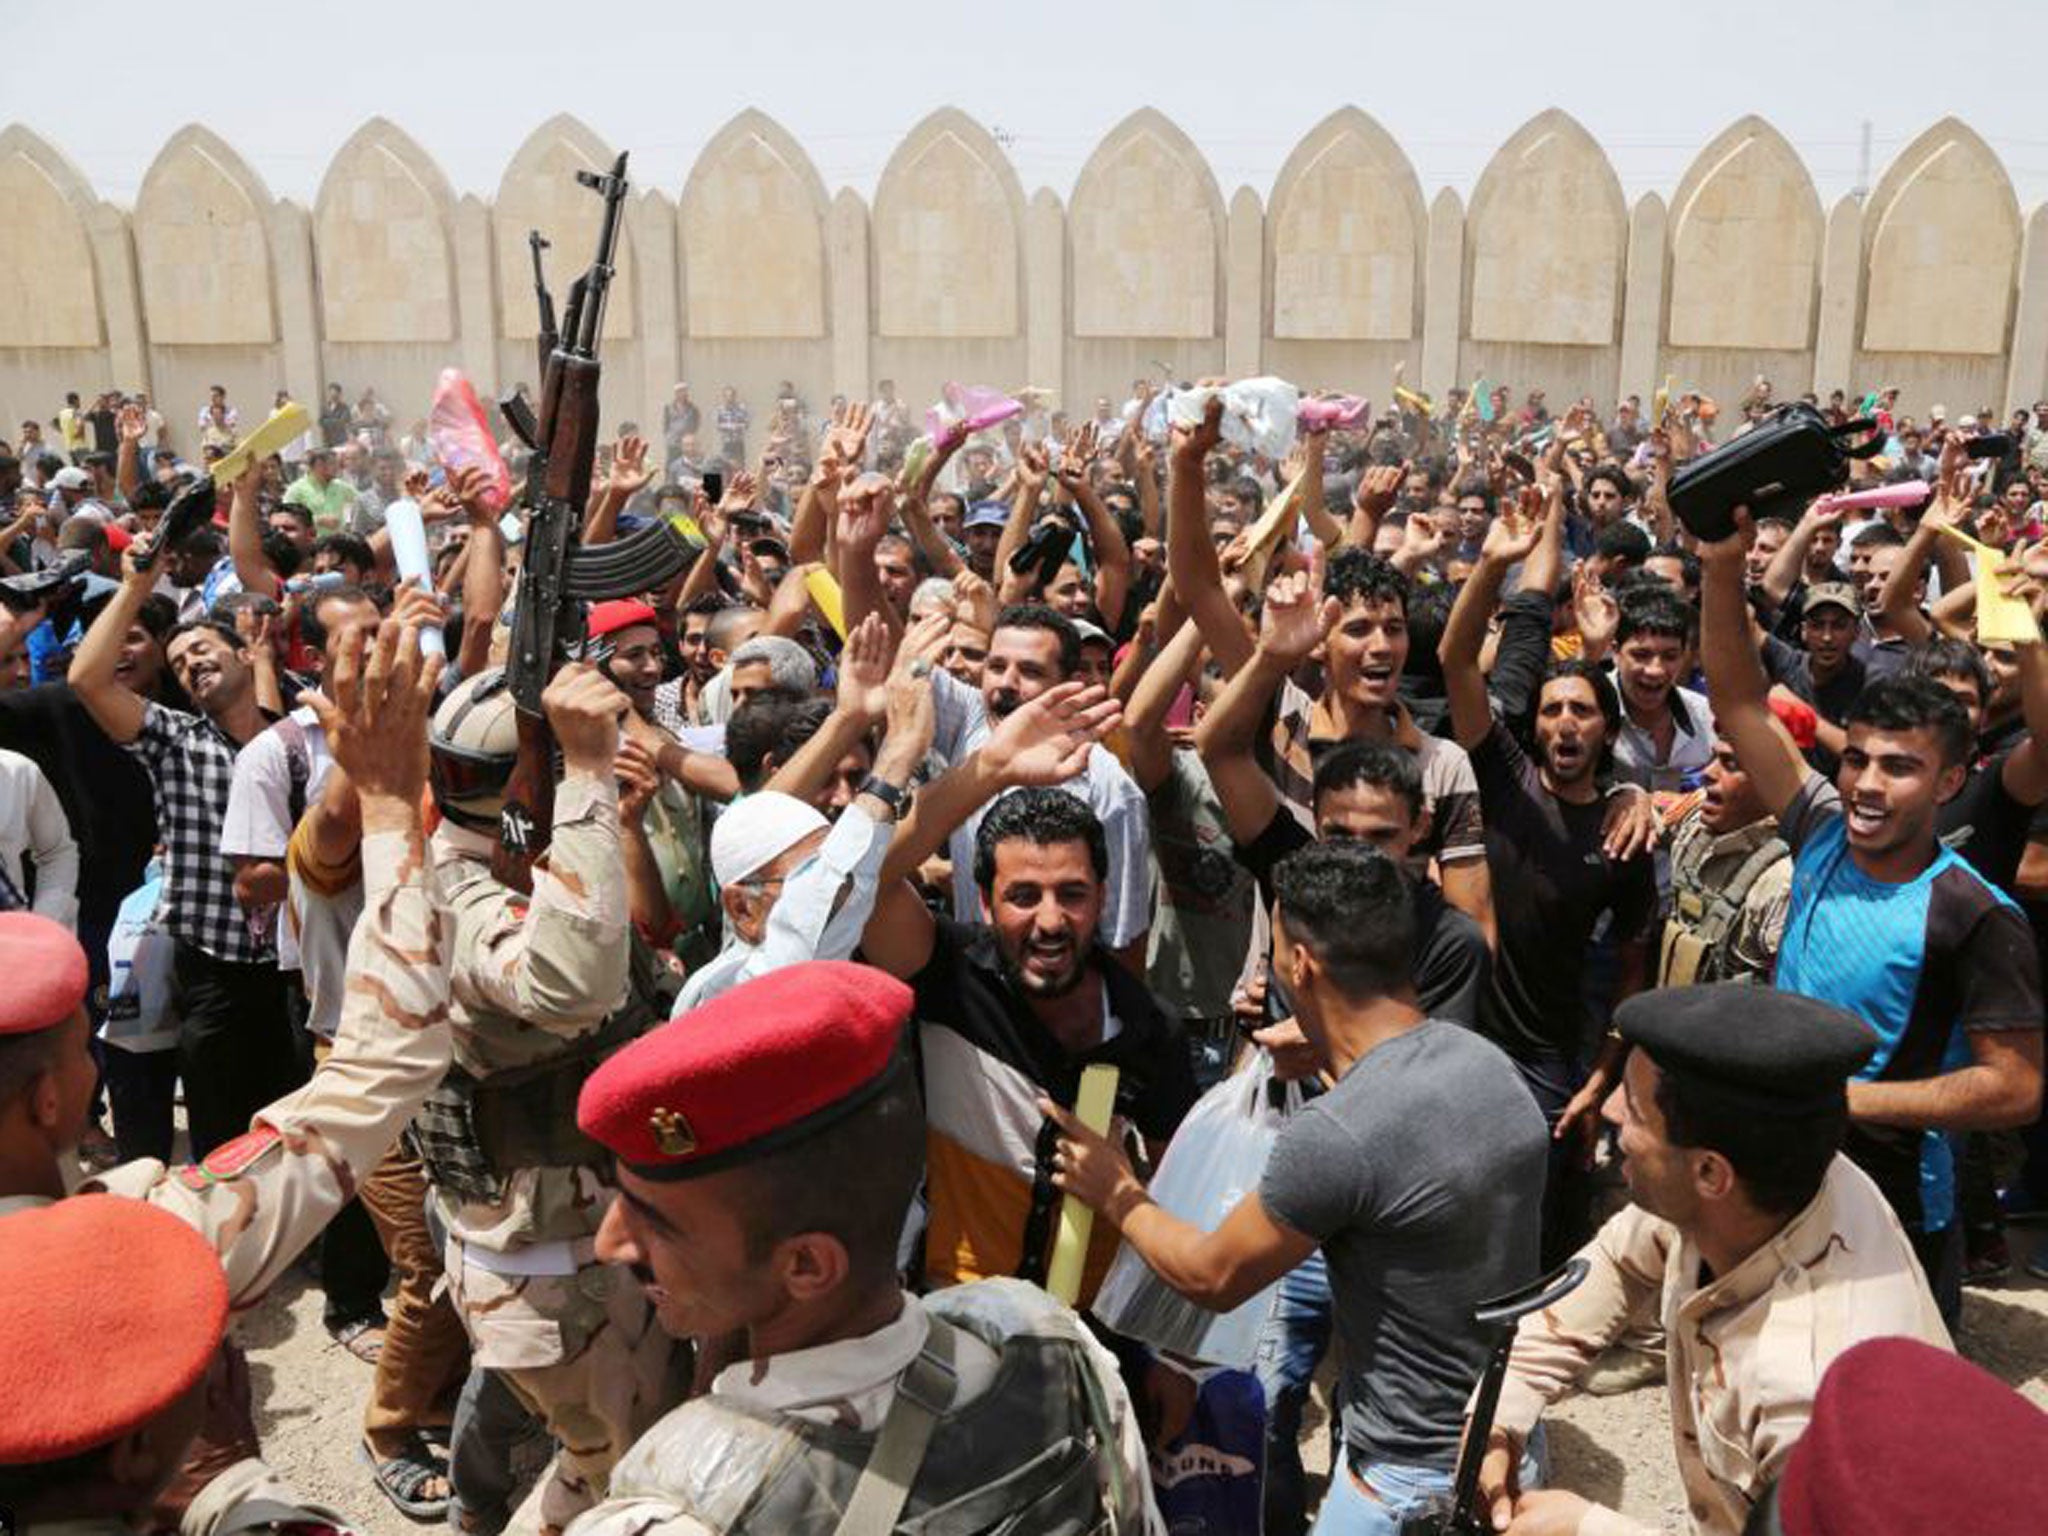 Hundreds of men turned up at an army recruitment centre to volunteer for the military service to protect Baghdad